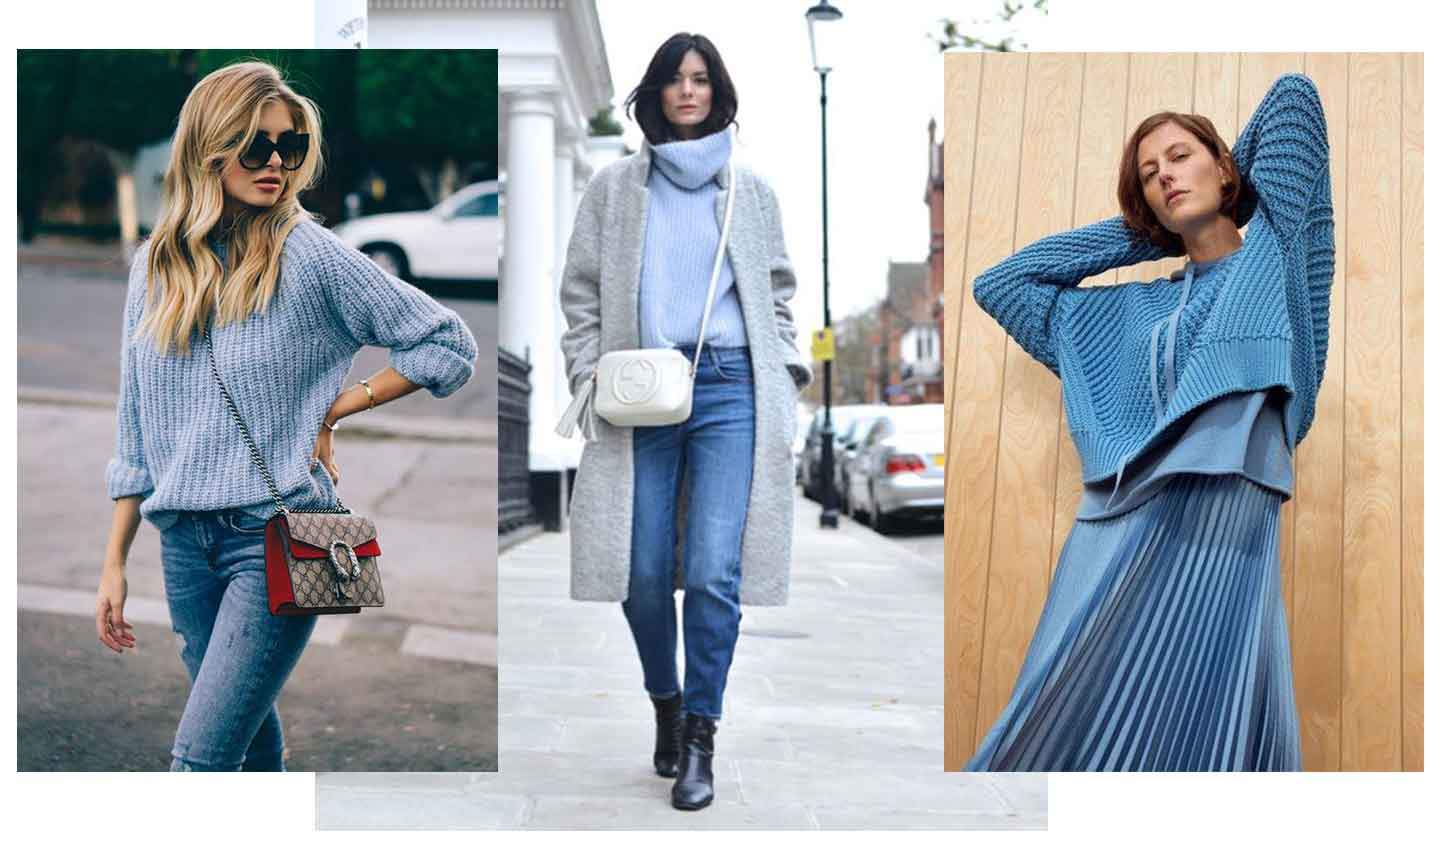 3 images of 3 women each wearing a blue knitted jumper with various outfit options